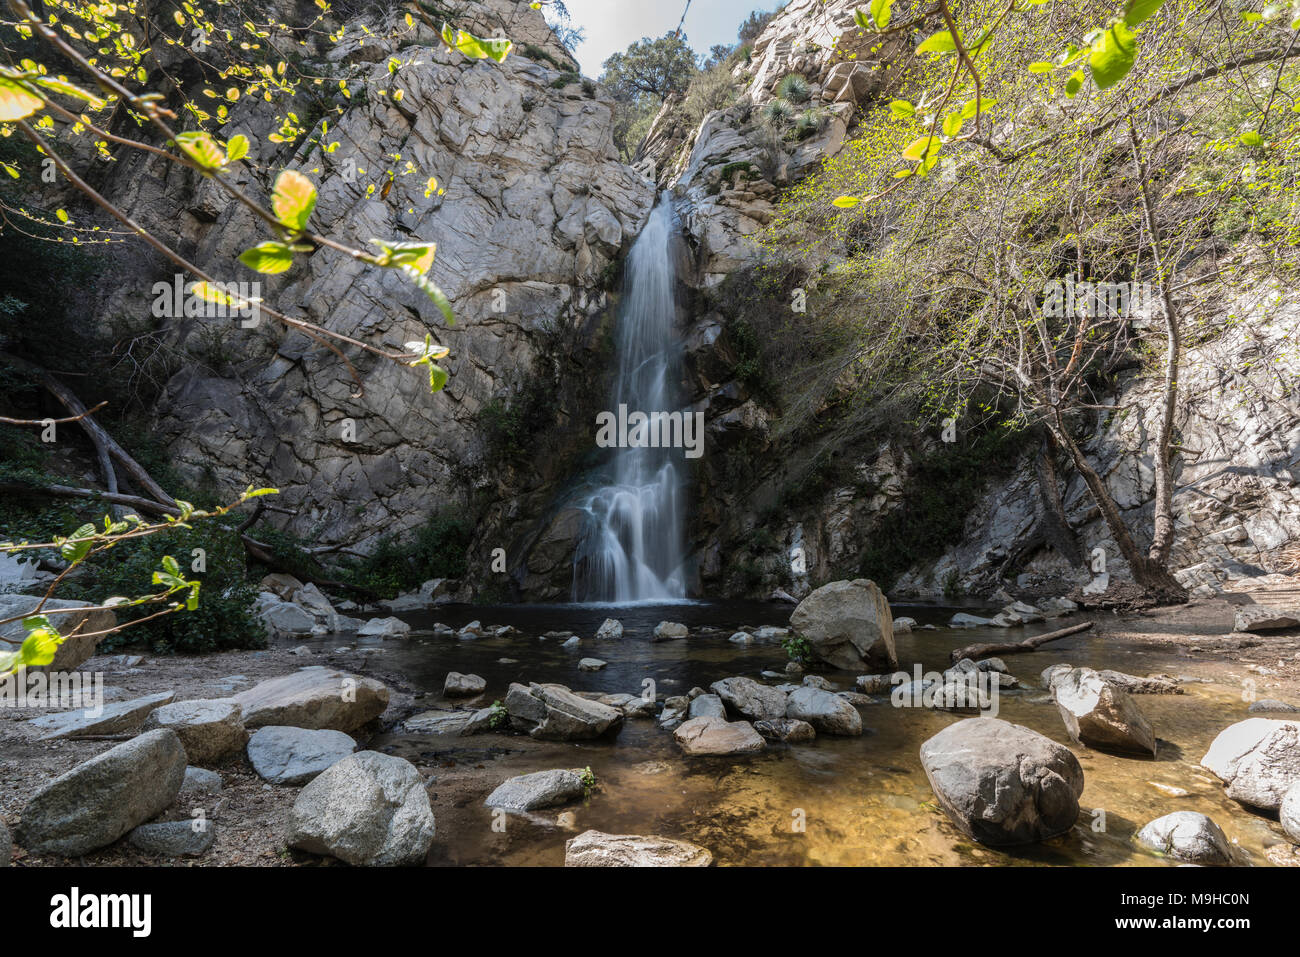 Sturtevant Falls in the San Gabriel Mountains above Los Angeles and Pasadena California. Stock Photo